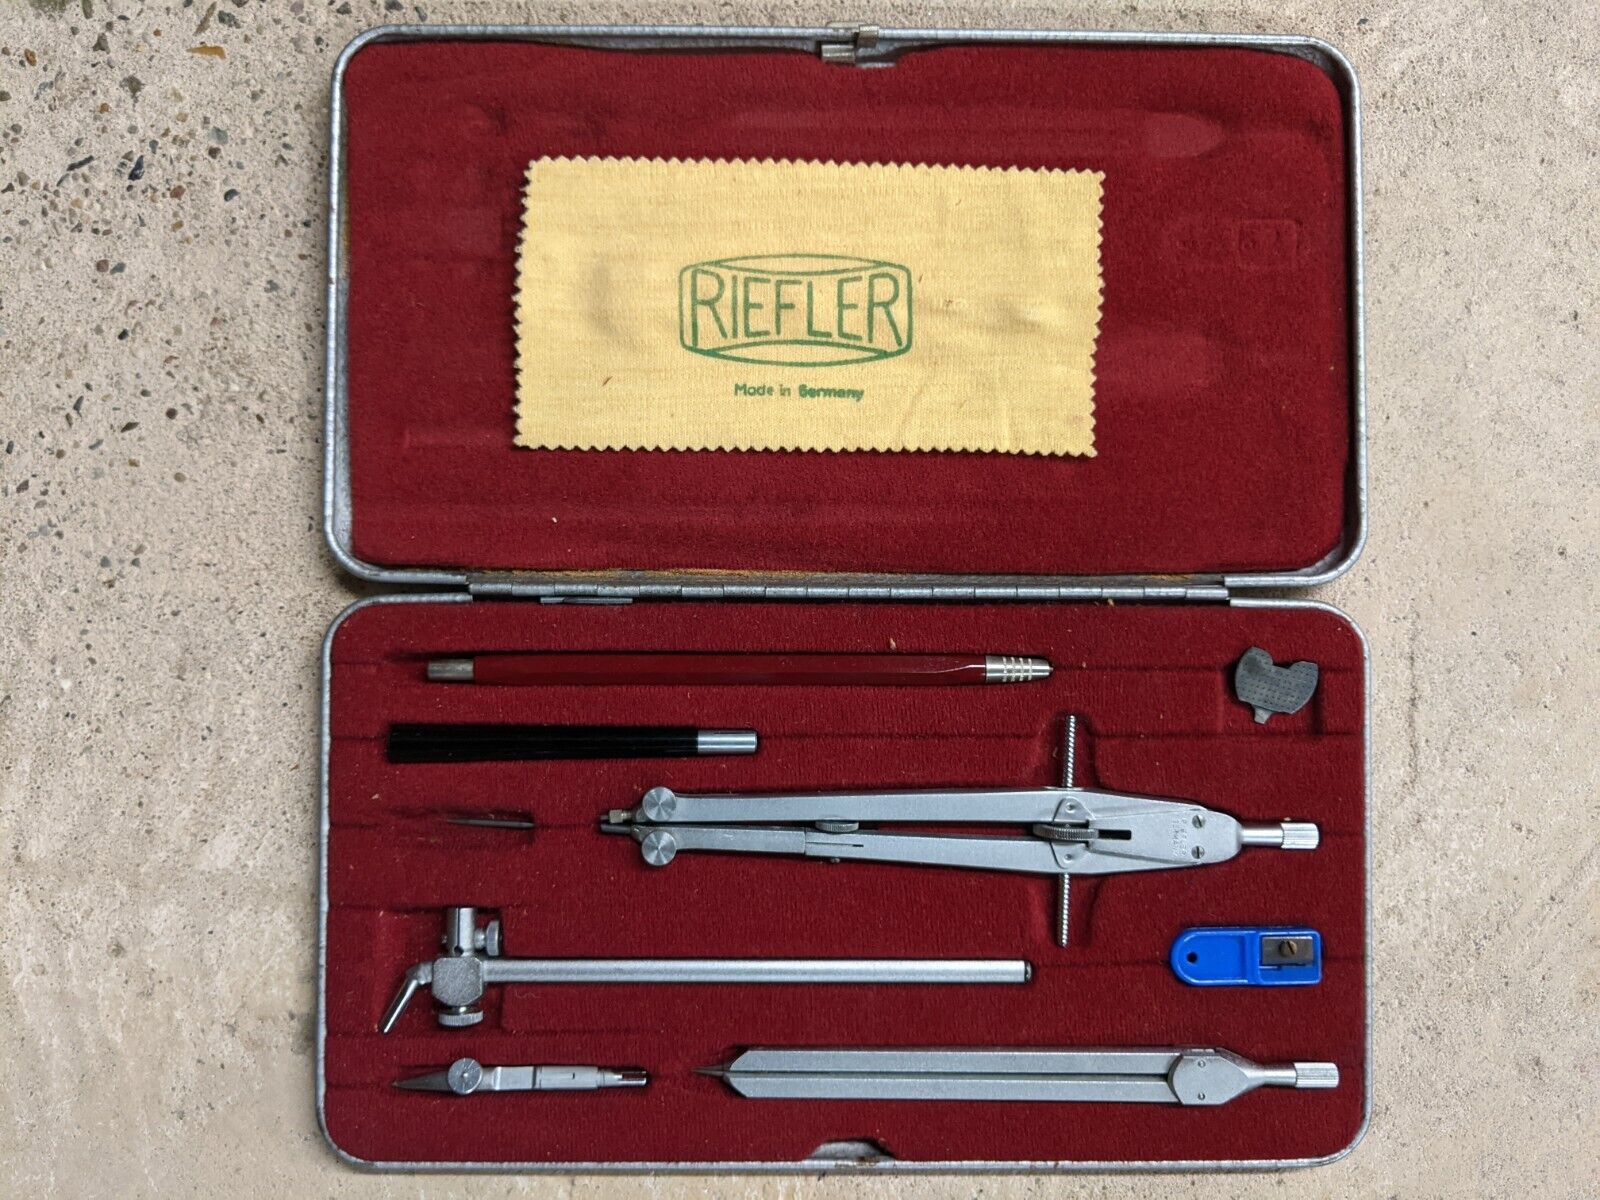 RIEFLER DRAFTING TOOL SET WITH METAL CASE VINTAGE MADE IN GERMANY